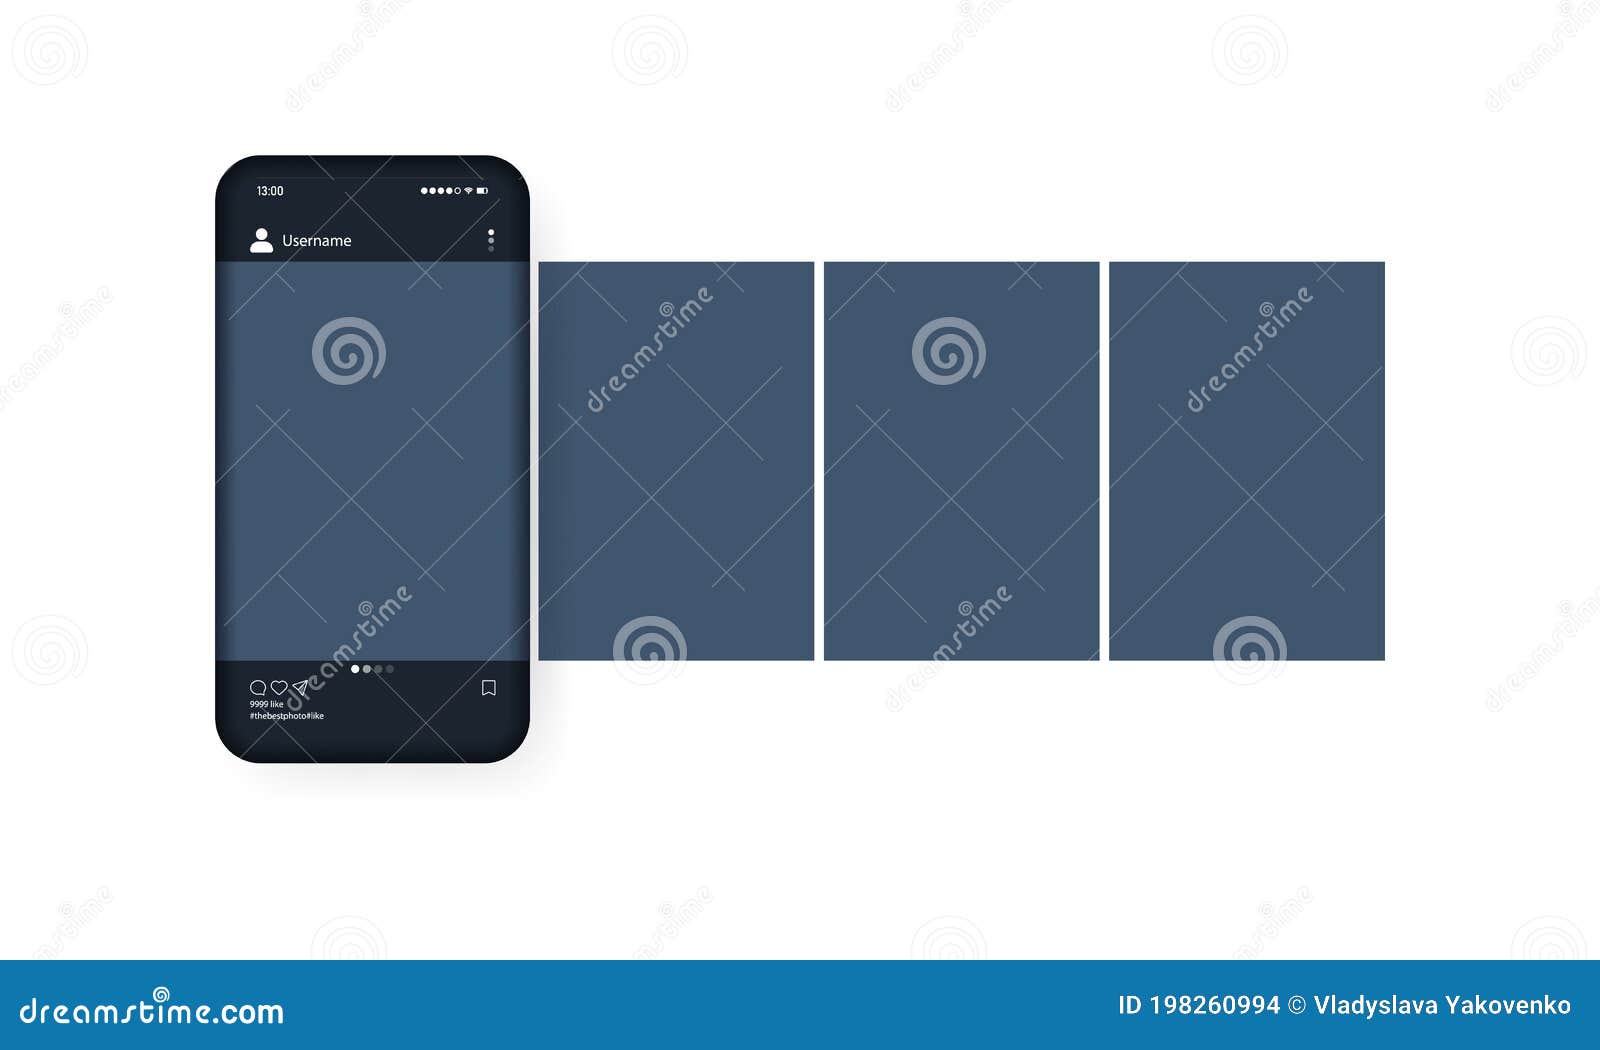 mockup of the mobile app with open photo social network. dark theme. photo galery.  eps 10.  on white background